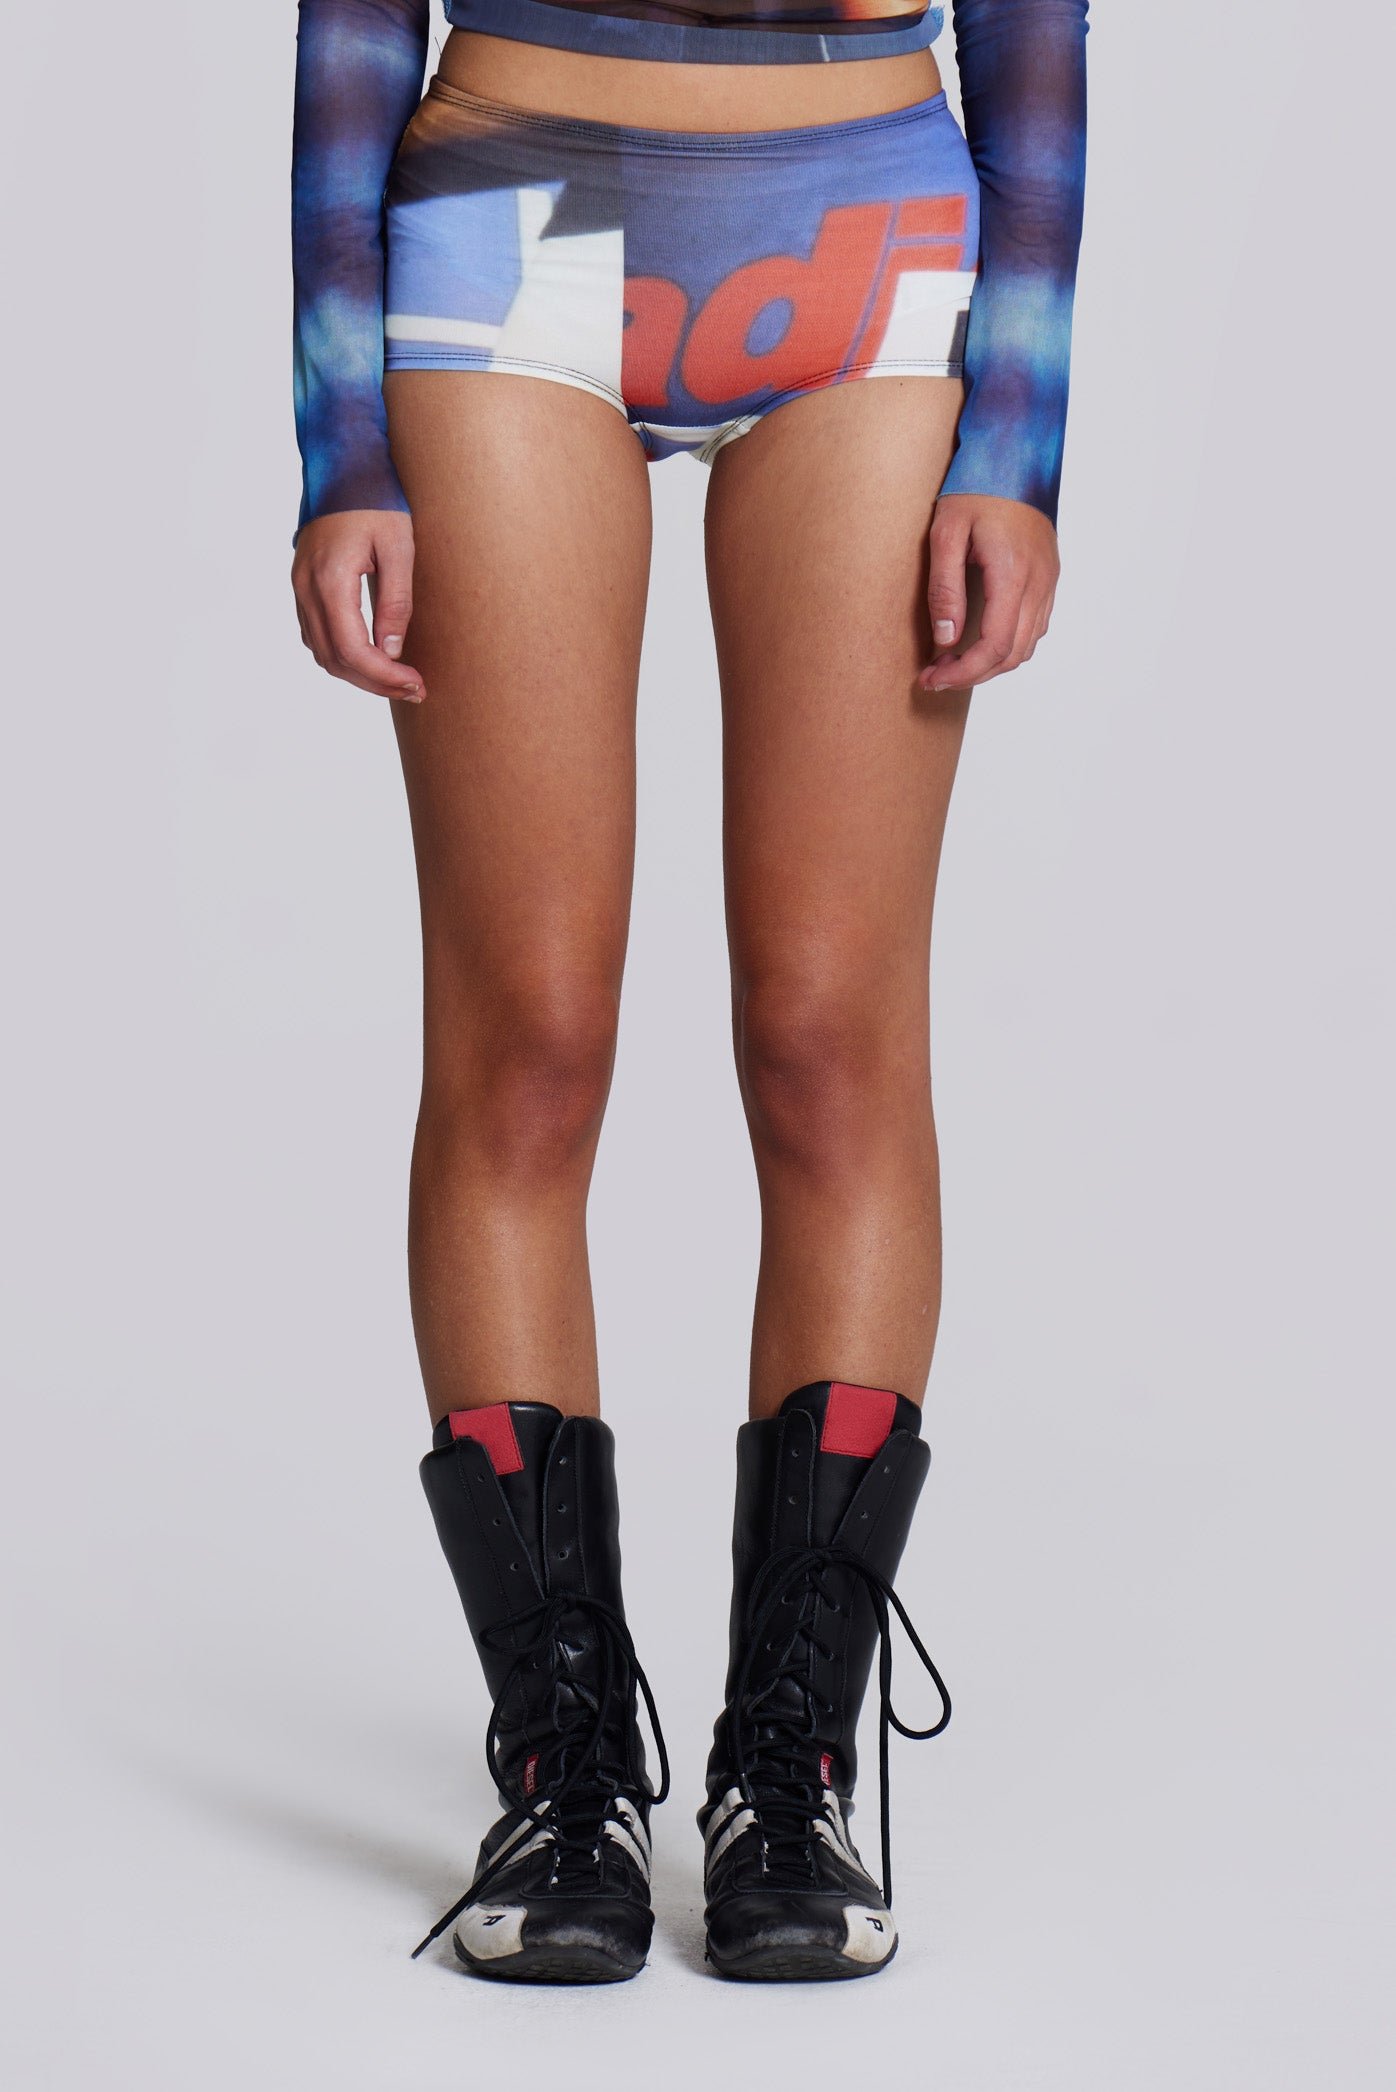 Woman wearing Jaded London and Sleazenation graphic printed hot pants, styled with black boots.